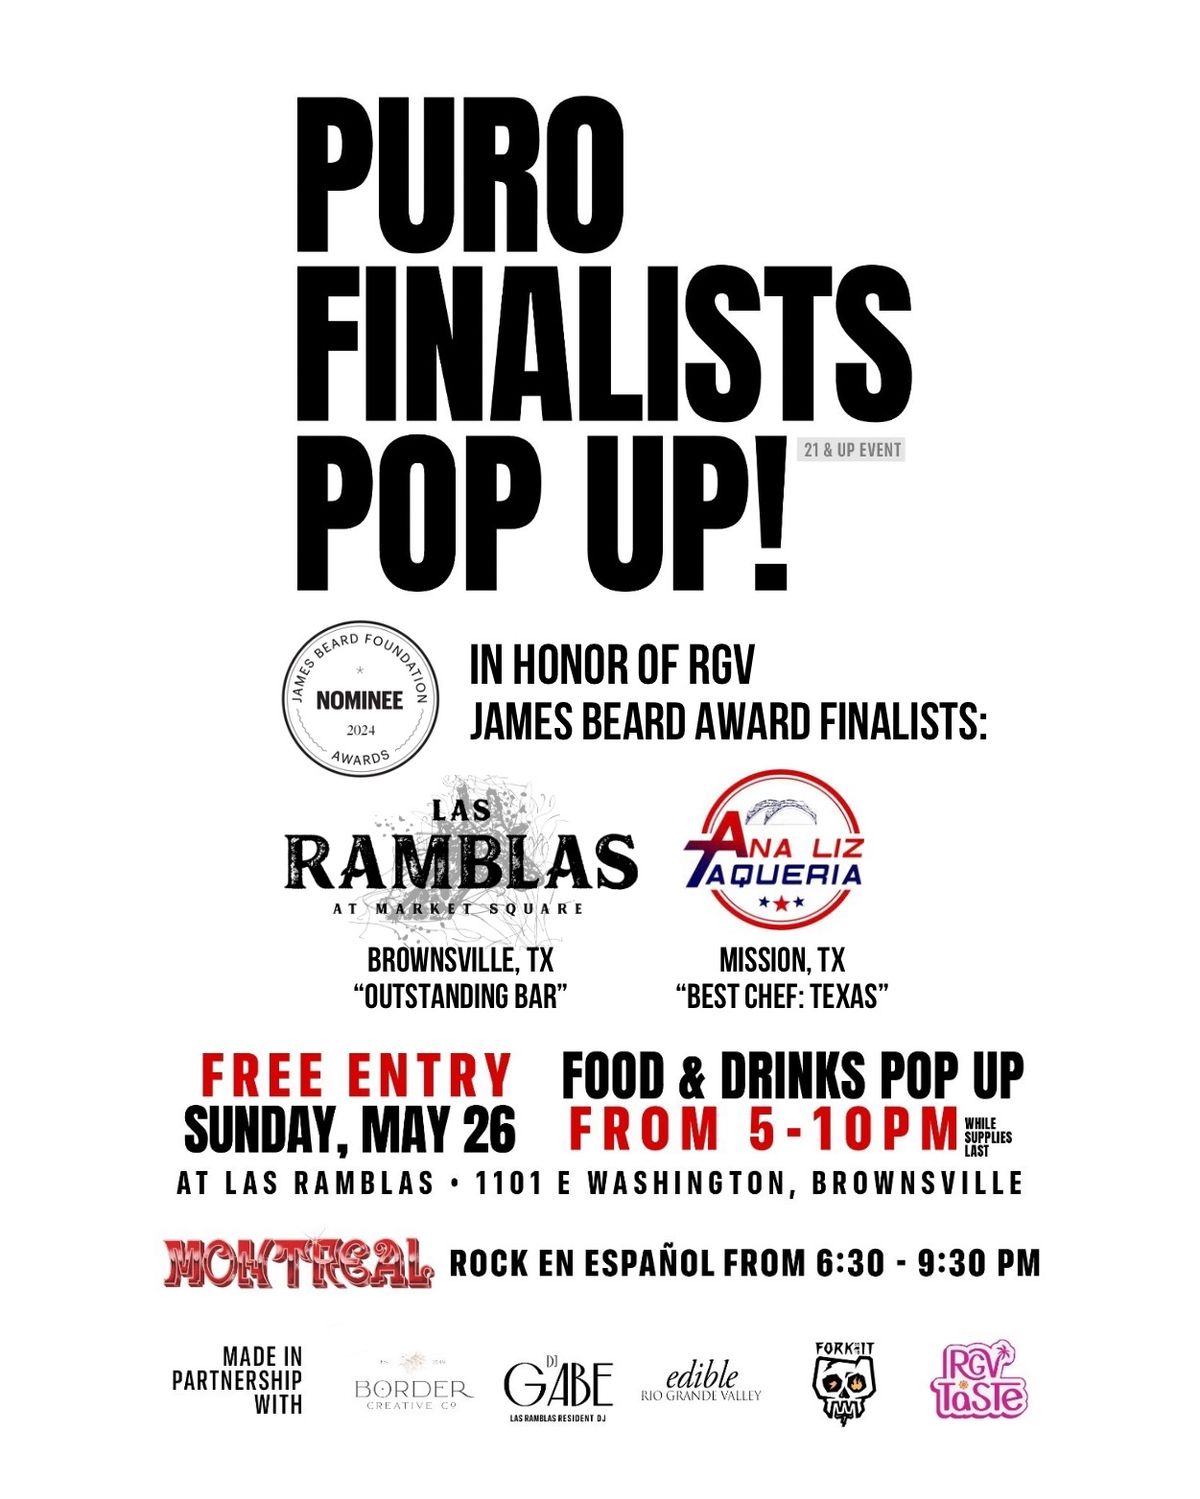 James Beard Finalists Pop-Up with Analiz Taqueria! ? 